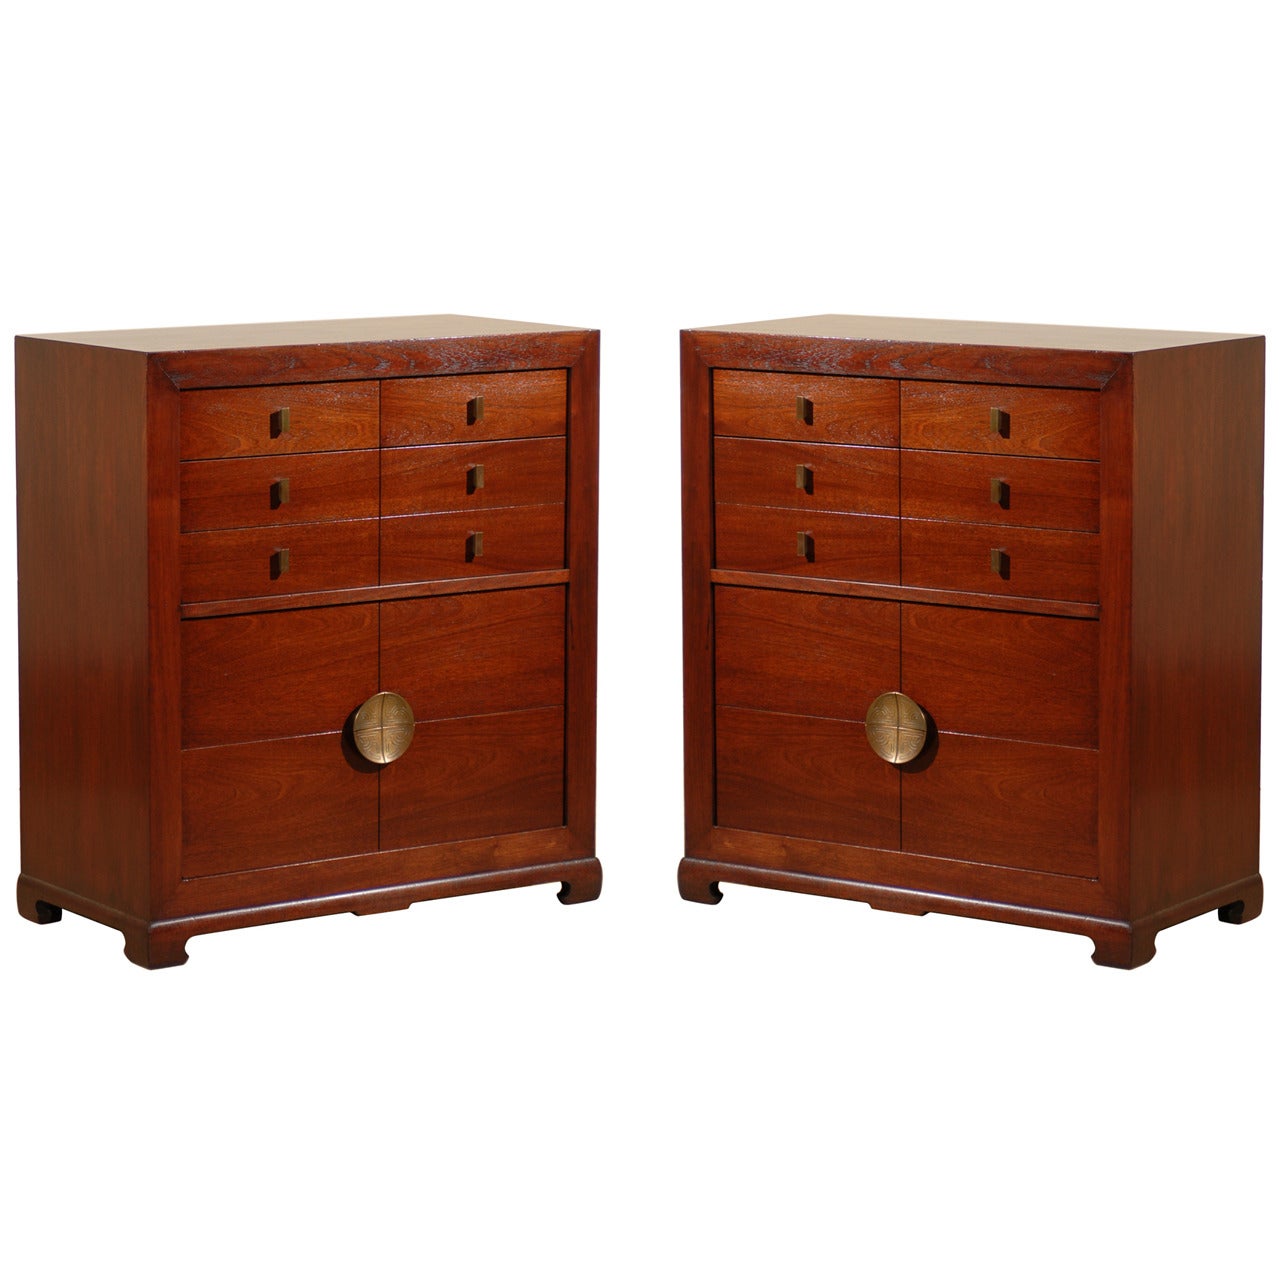 Beautiful Modern Chest, Pair Available, Choice of Finish